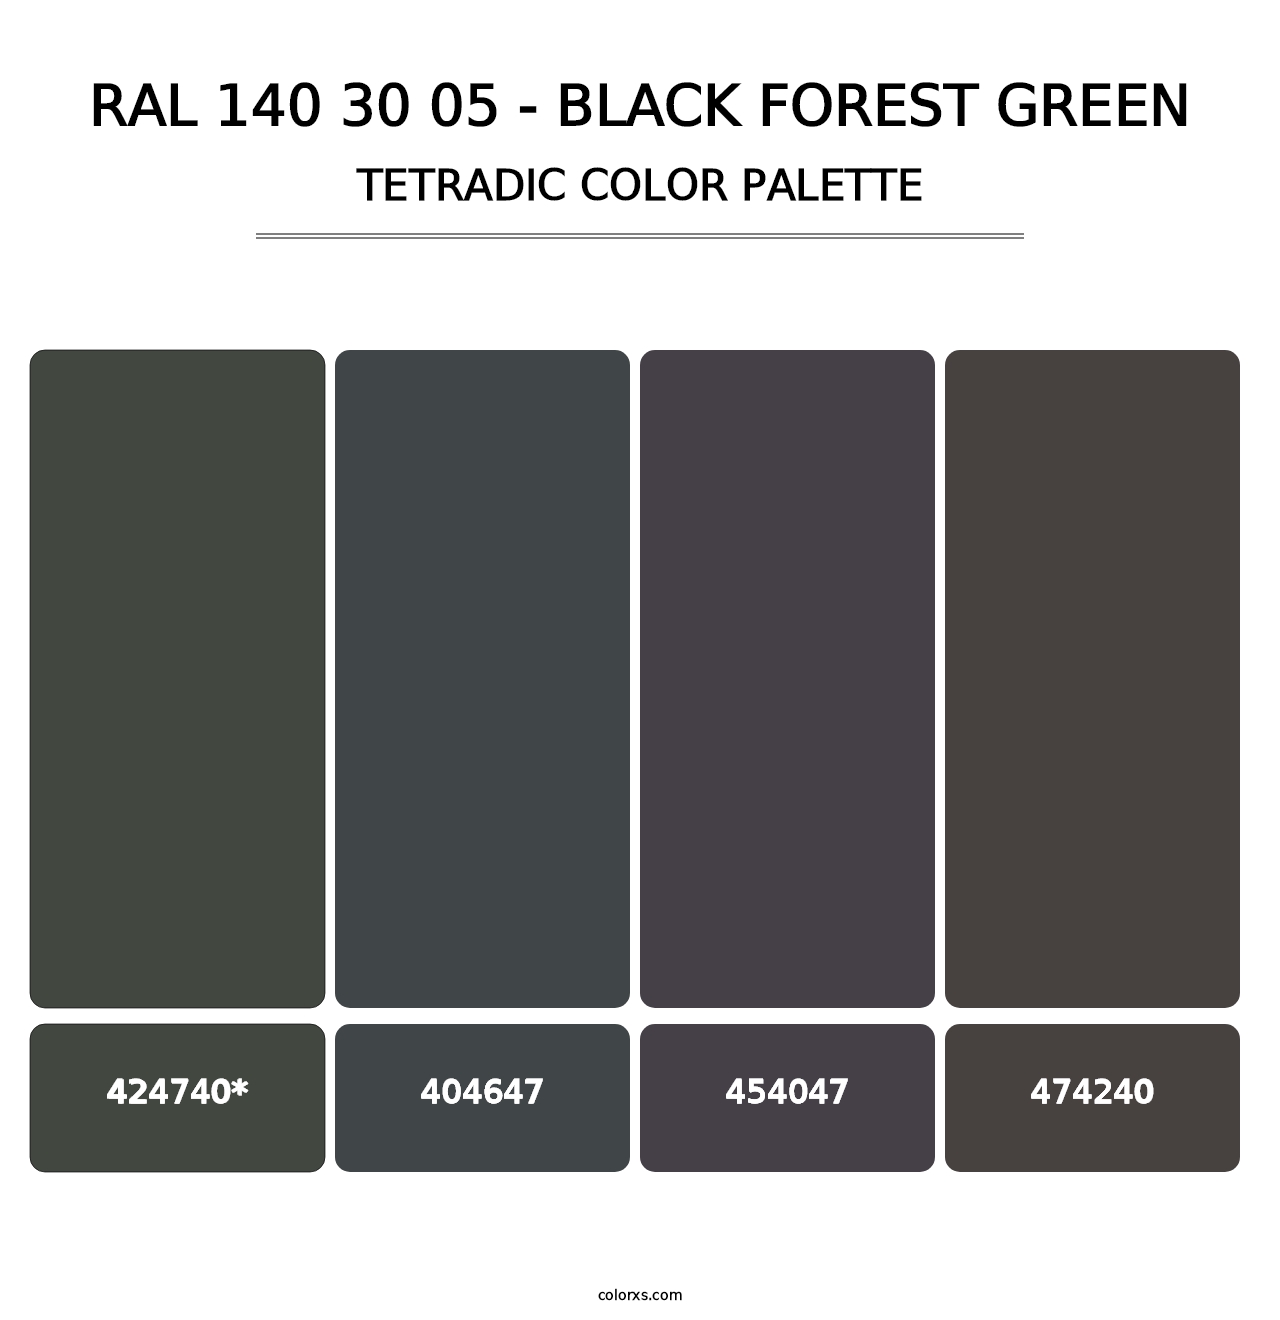 RAL 140 30 05 - Black Forest Green - Tetradic Color Palette